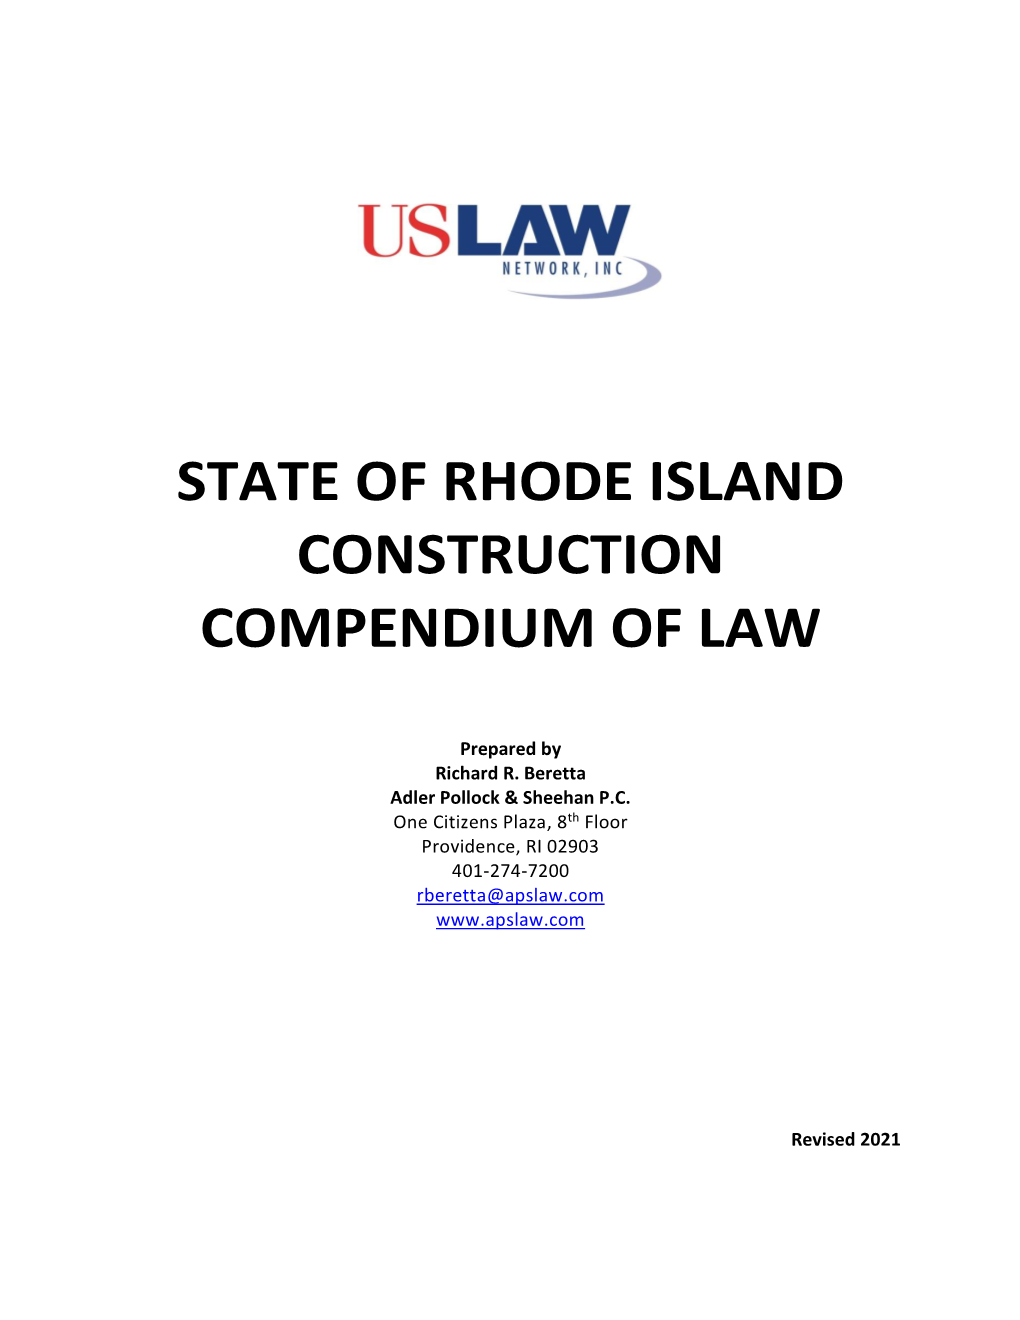 State of Rhode Island Construction Compendium of Law